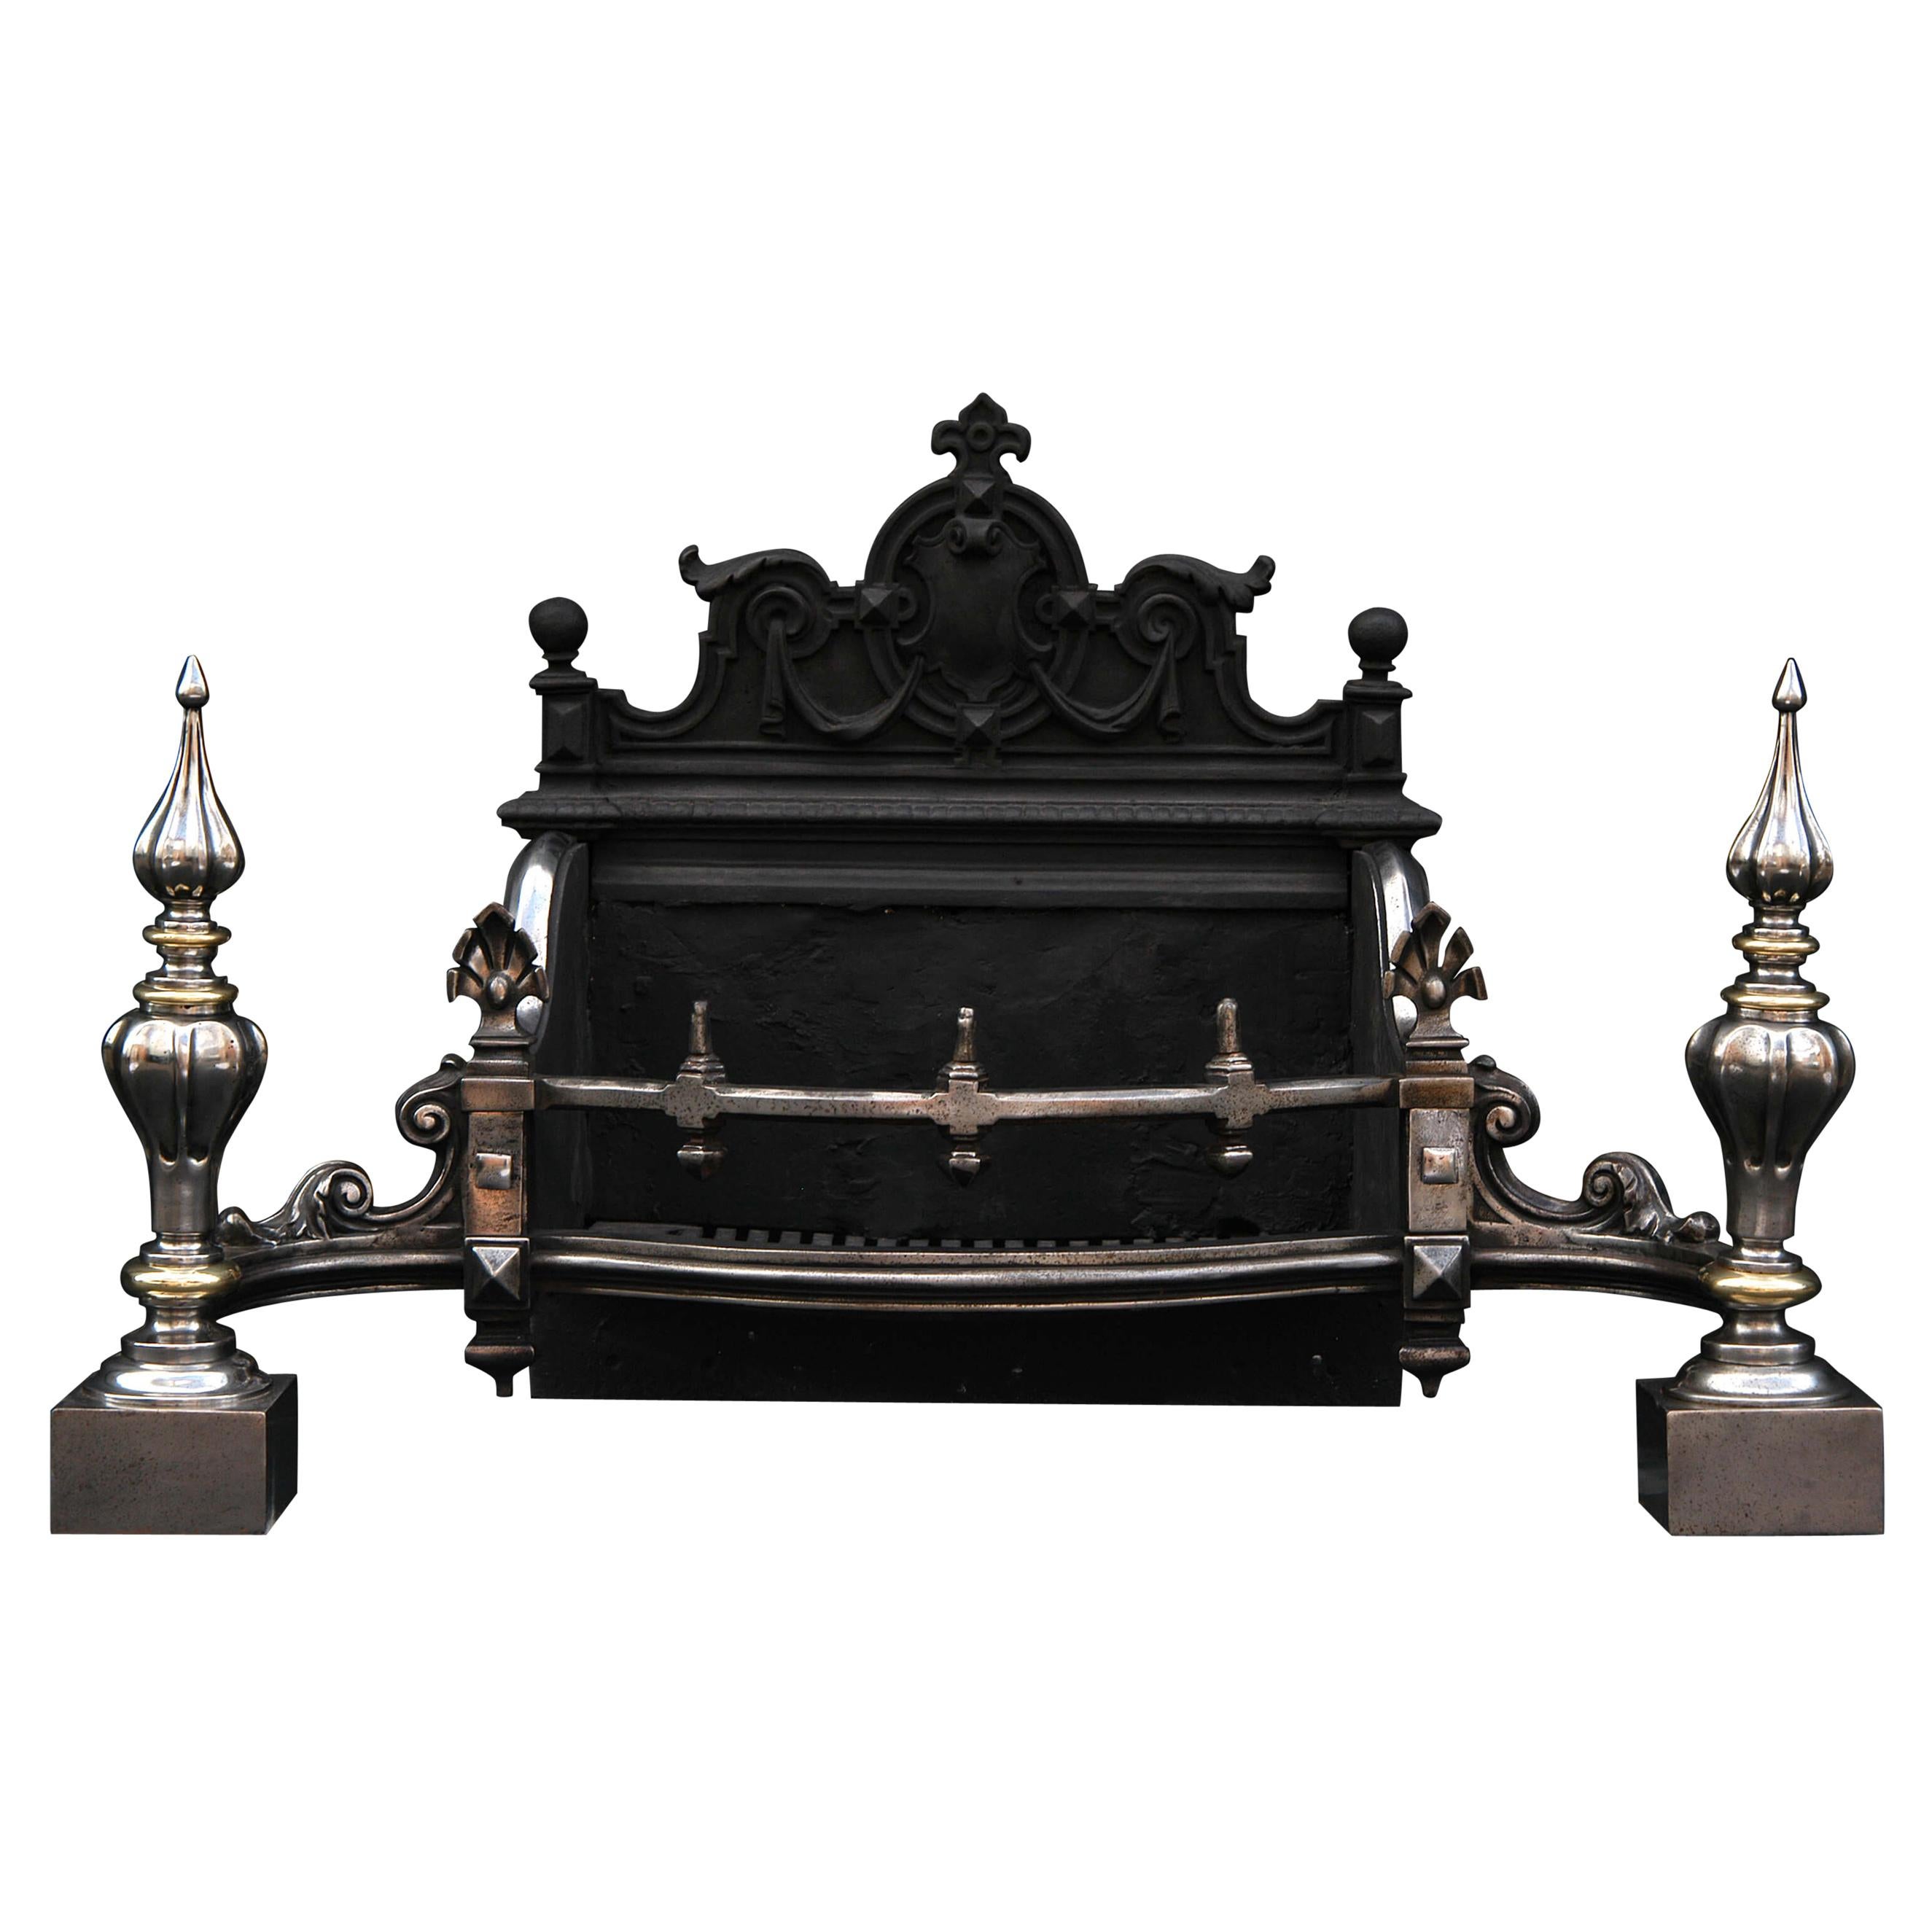 19th Century English Gothic Revival Firegrate